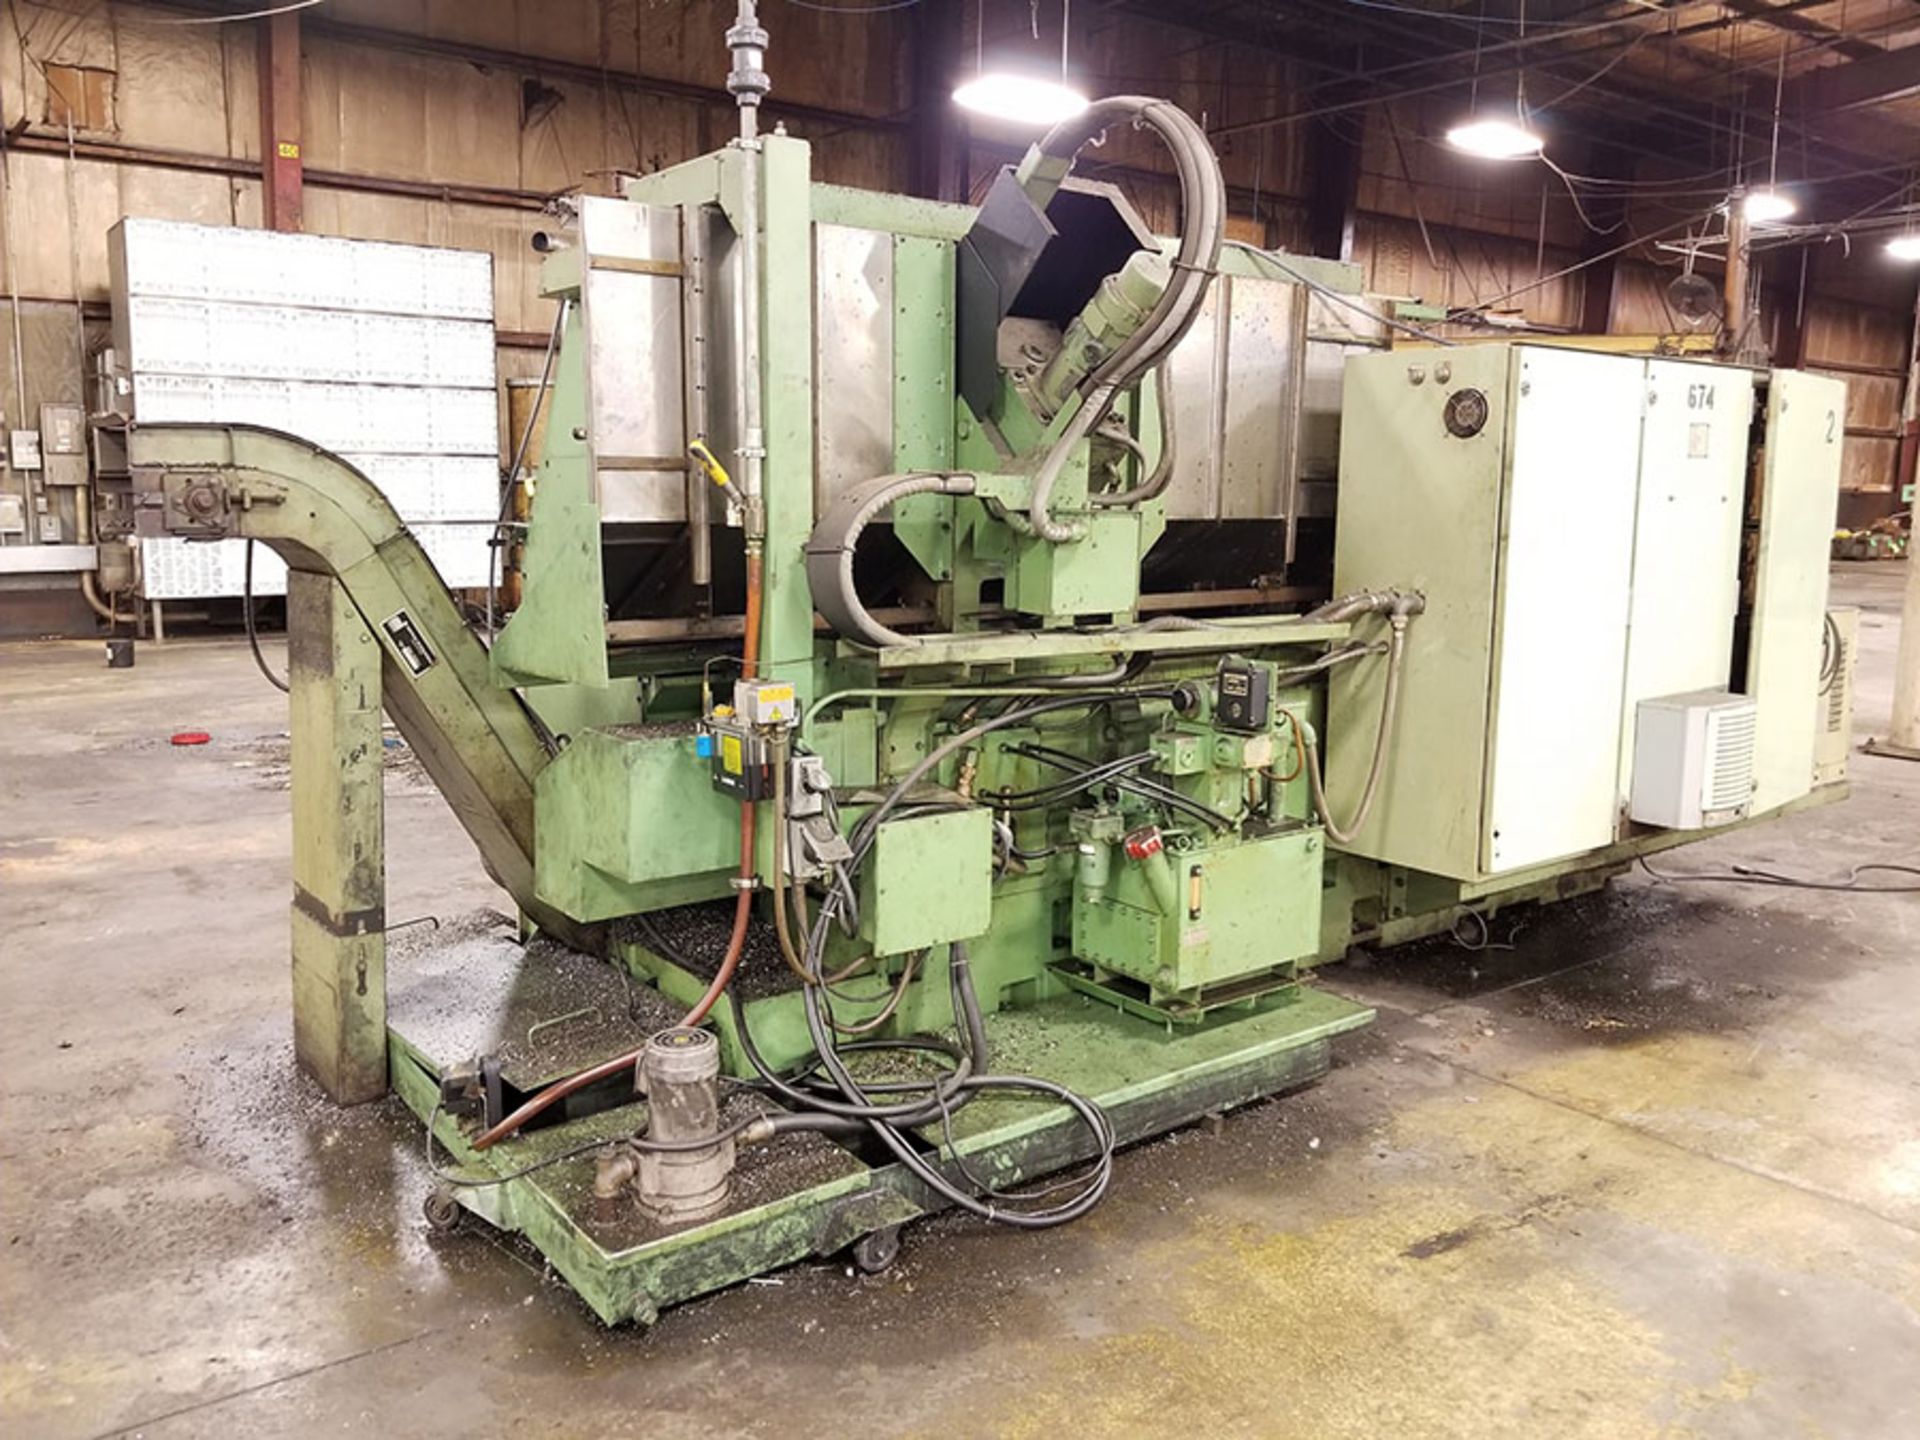 OKUMA LC-30 CNC LATHE, S/N 0319, 8 & 7-TOOL POSITION TURRETS, OUTFEED CHIP CONVEYOR - Image 16 of 16